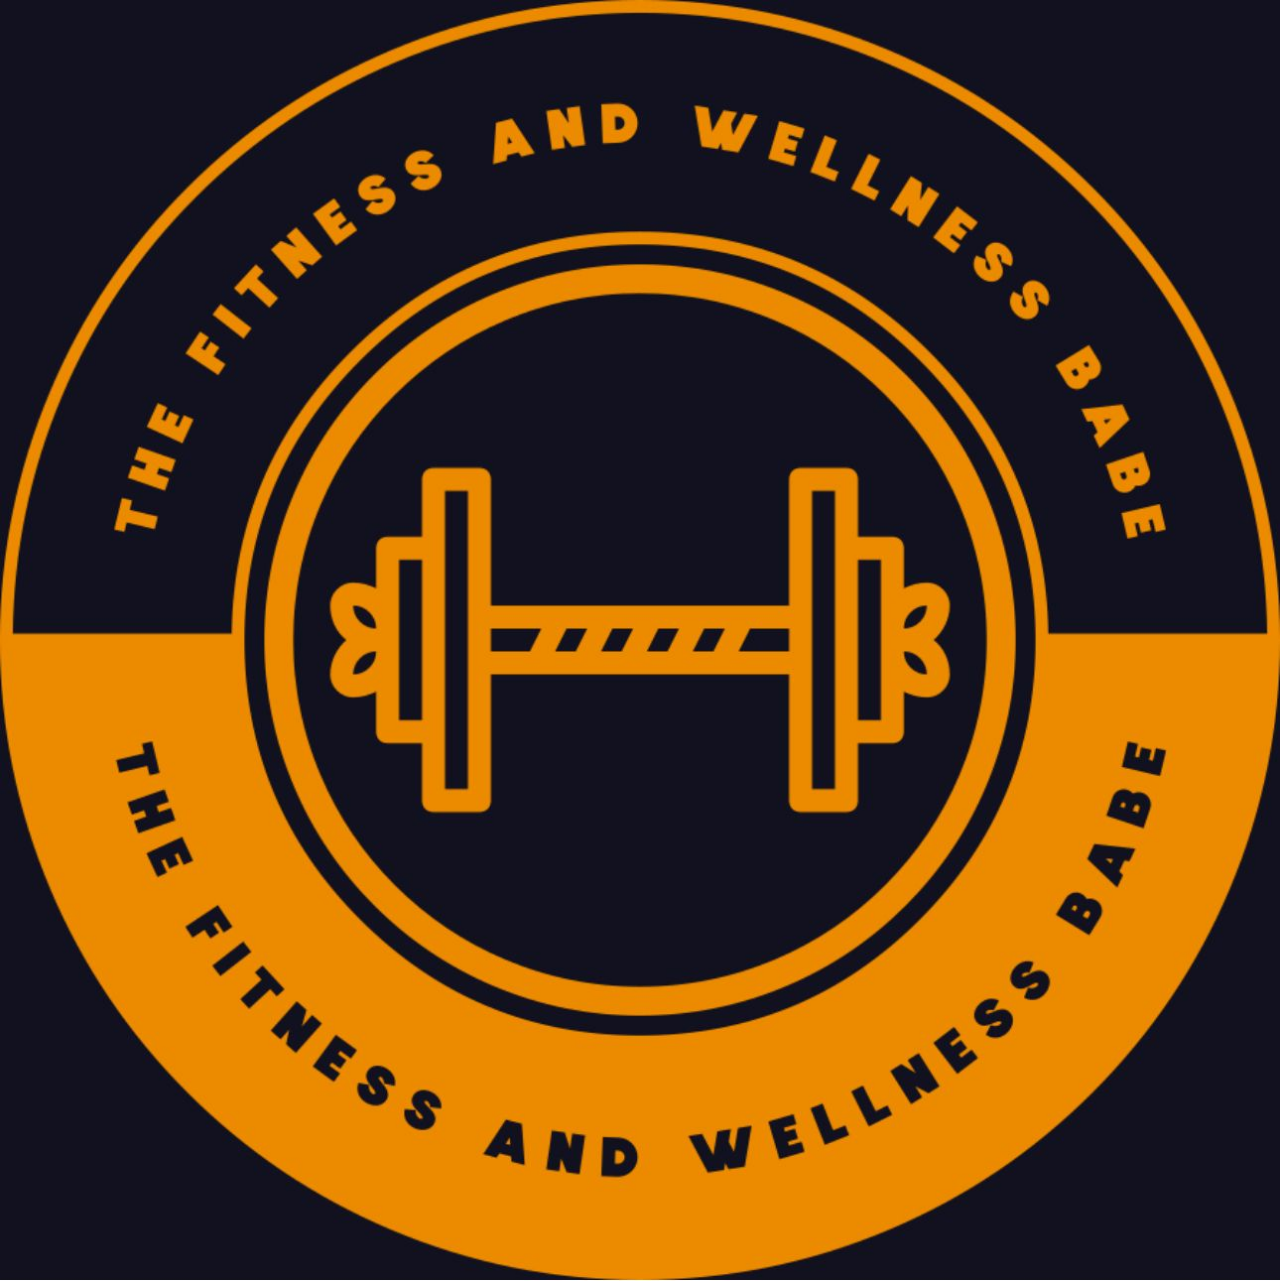 The Fitness and Wellness Babe's logo